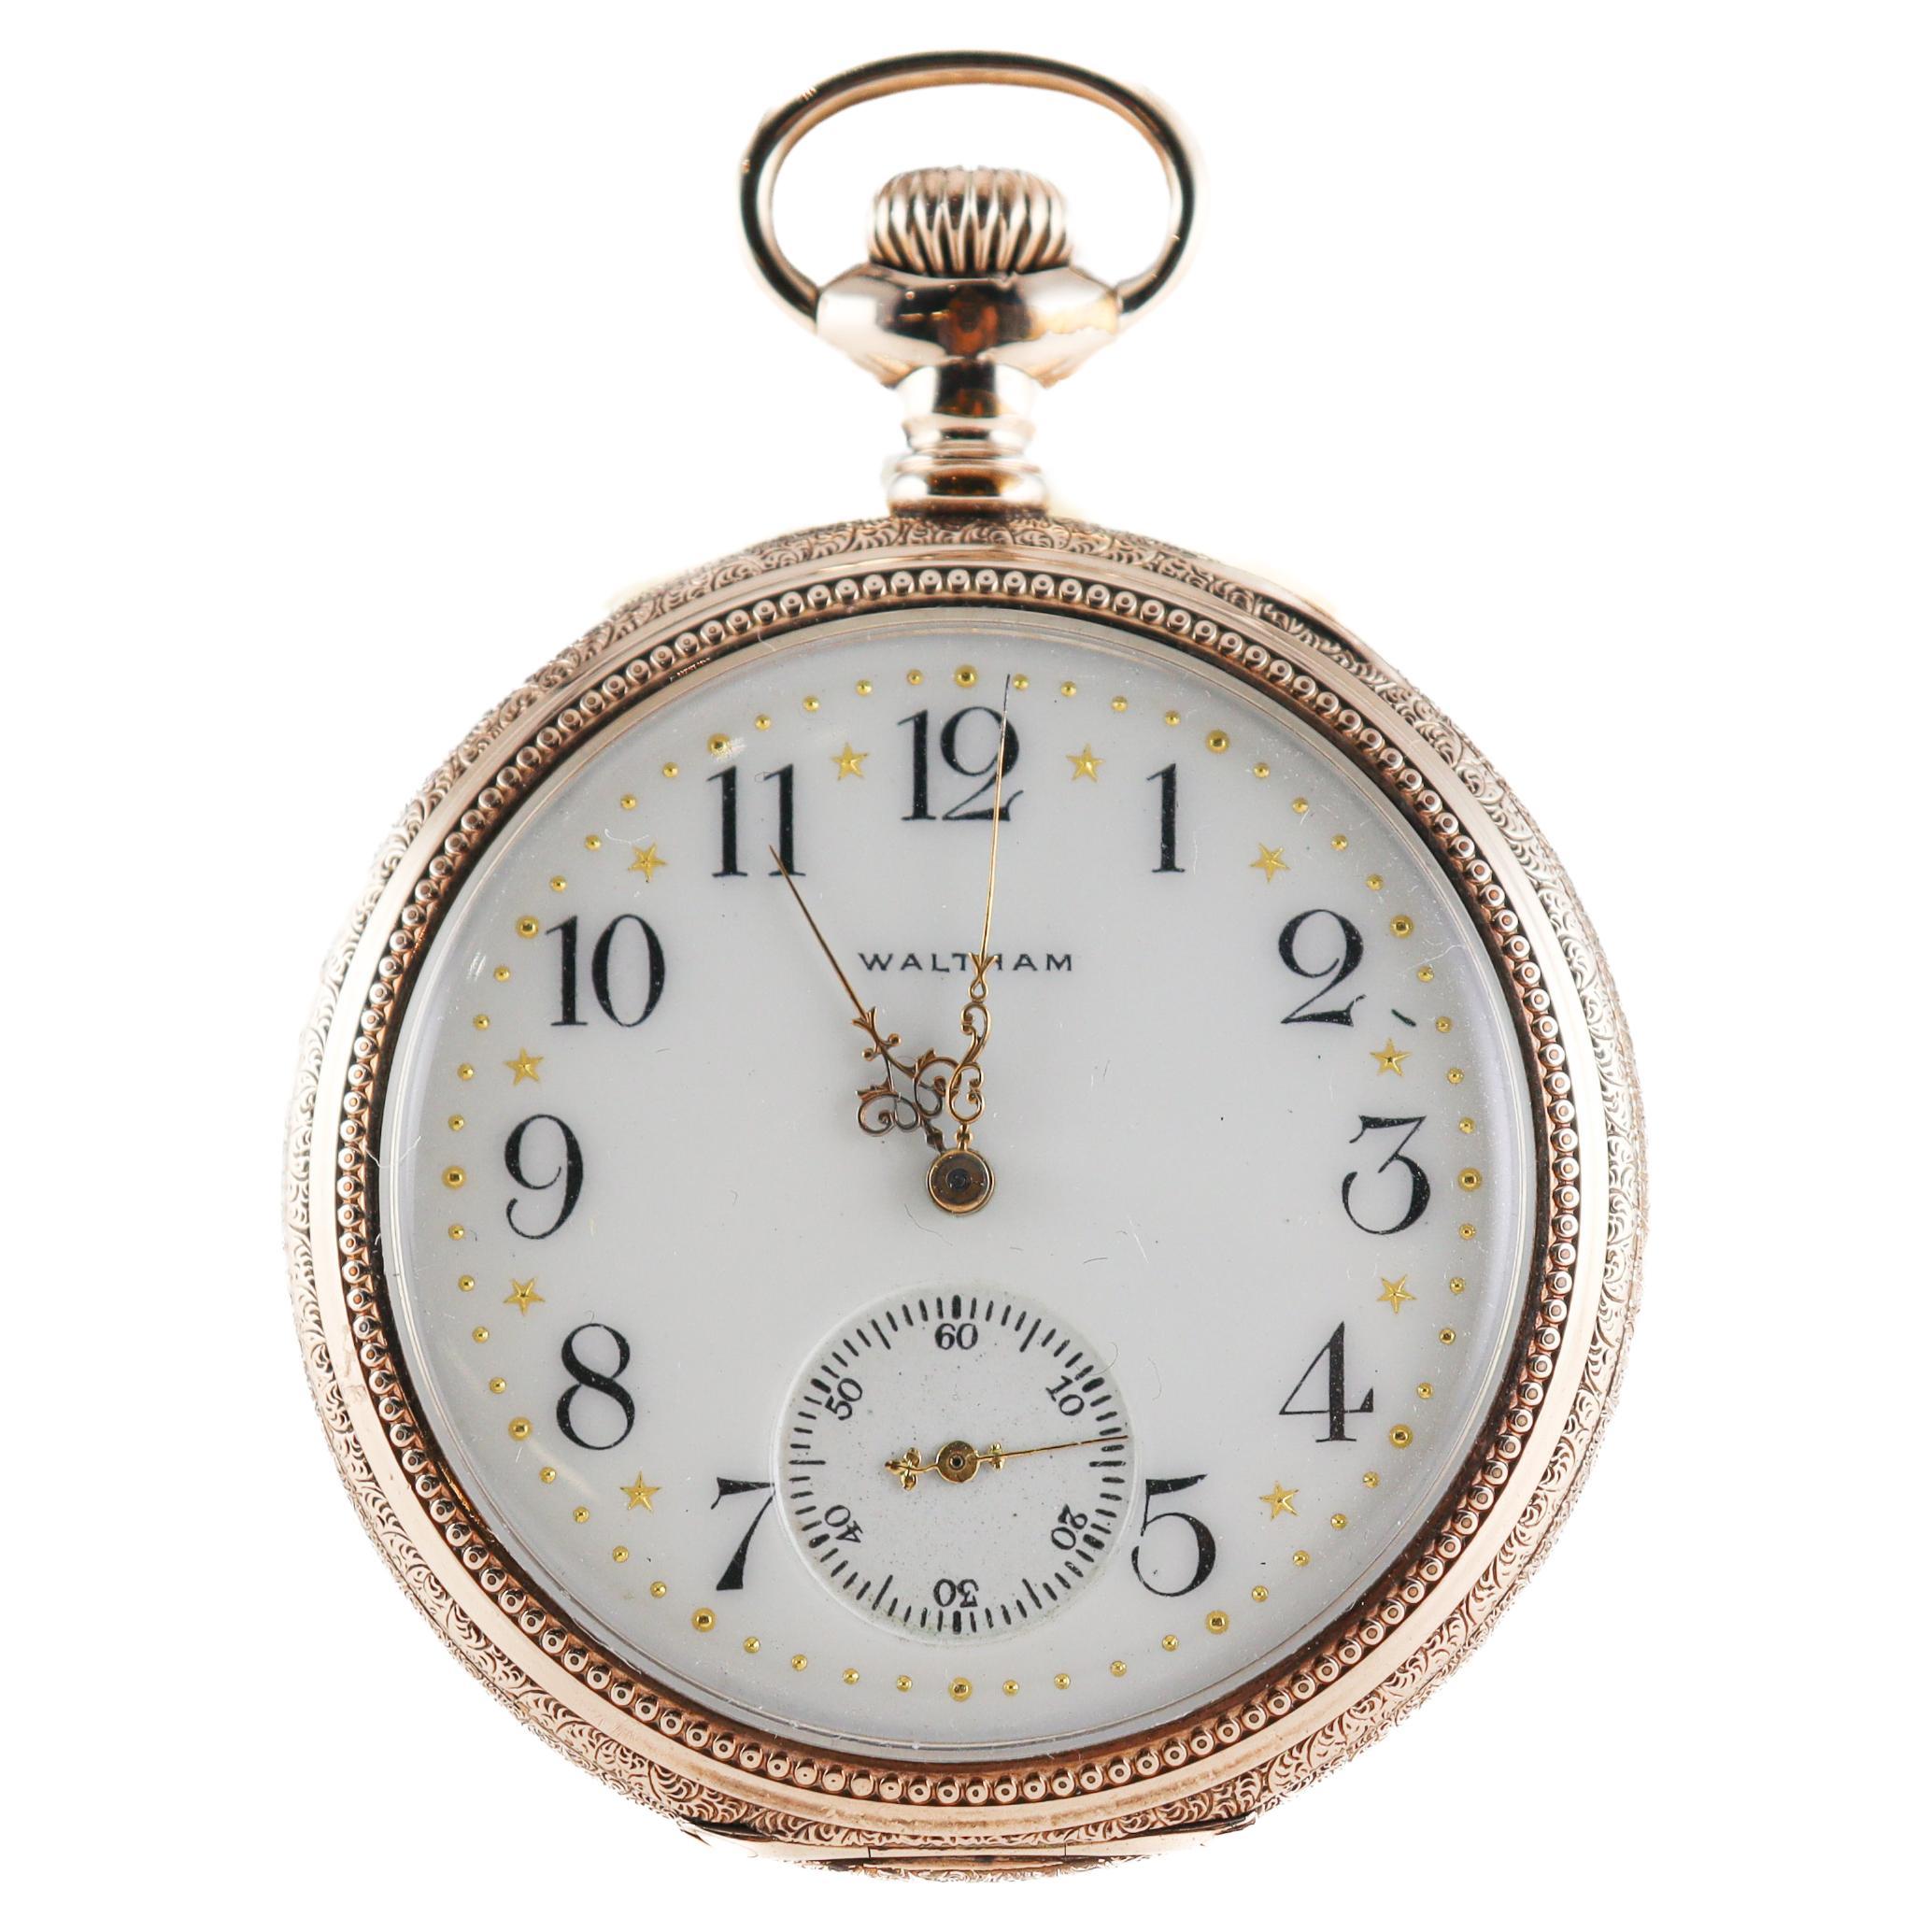 FACTORY / HOUSE: Waltham Watch Company
STYLE / REFERENCE: Open Faced Pocket Watch
METAL / MATERIAL: 14Kt. Yellow Gold Filled
CIRCA / YEAR: 1897
DIMENSIONS / SIZE: 46mm Diameter 
MOVEMENT / CALIBER: Manual Winding / Jewels 17 / Caliber ROYAL
DIAL /